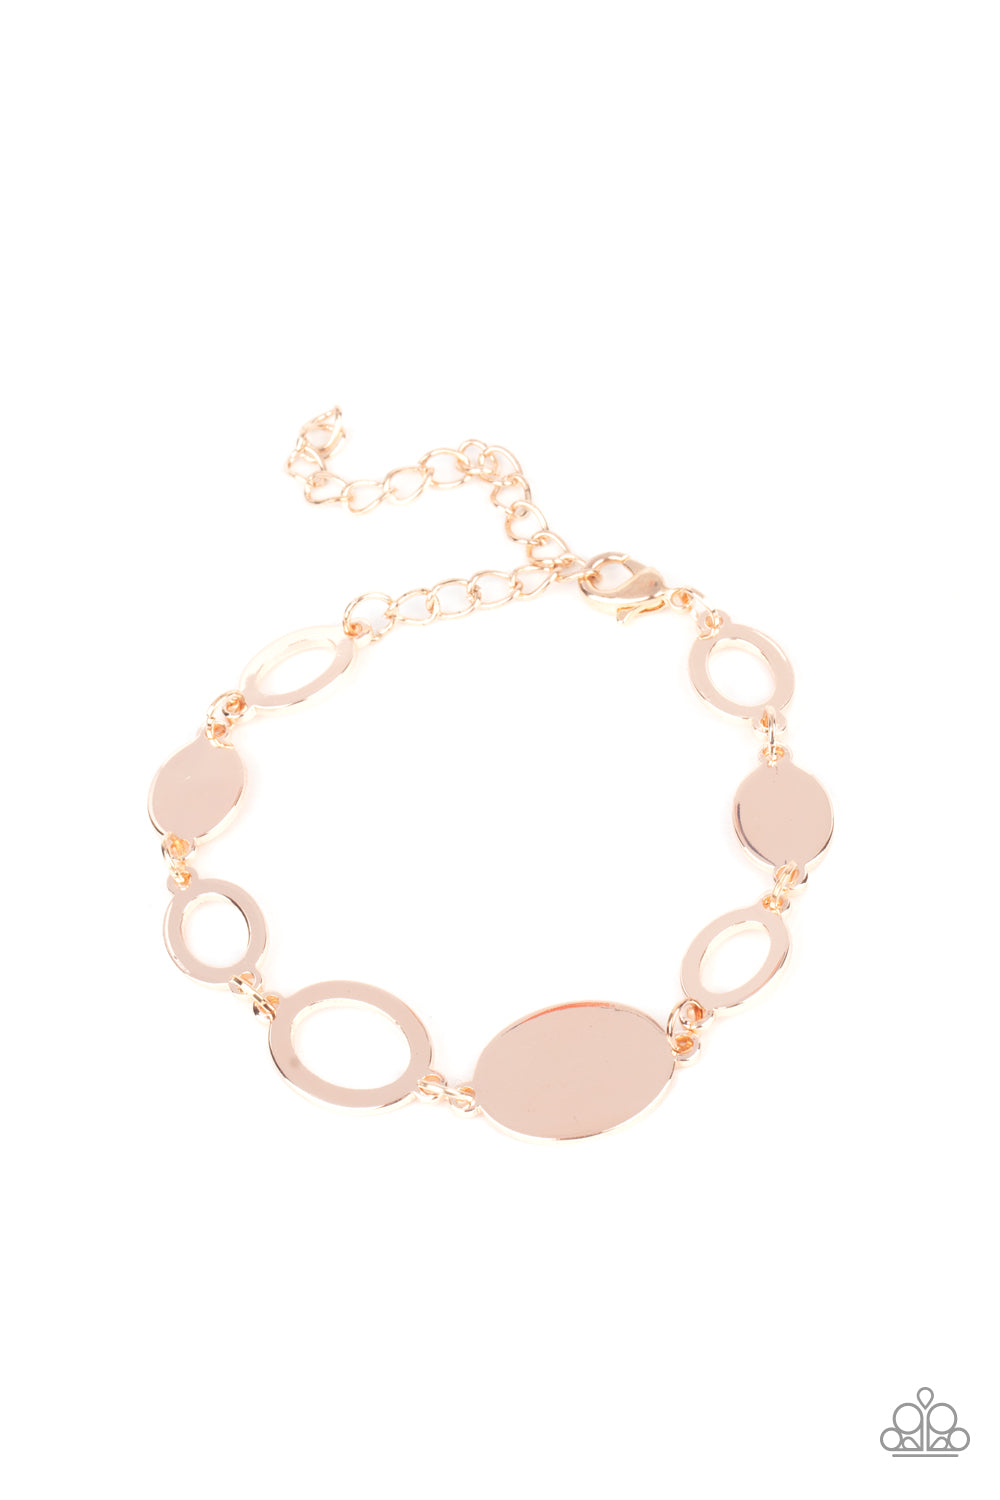 OVAL and Out - Rose Gold Bracelet